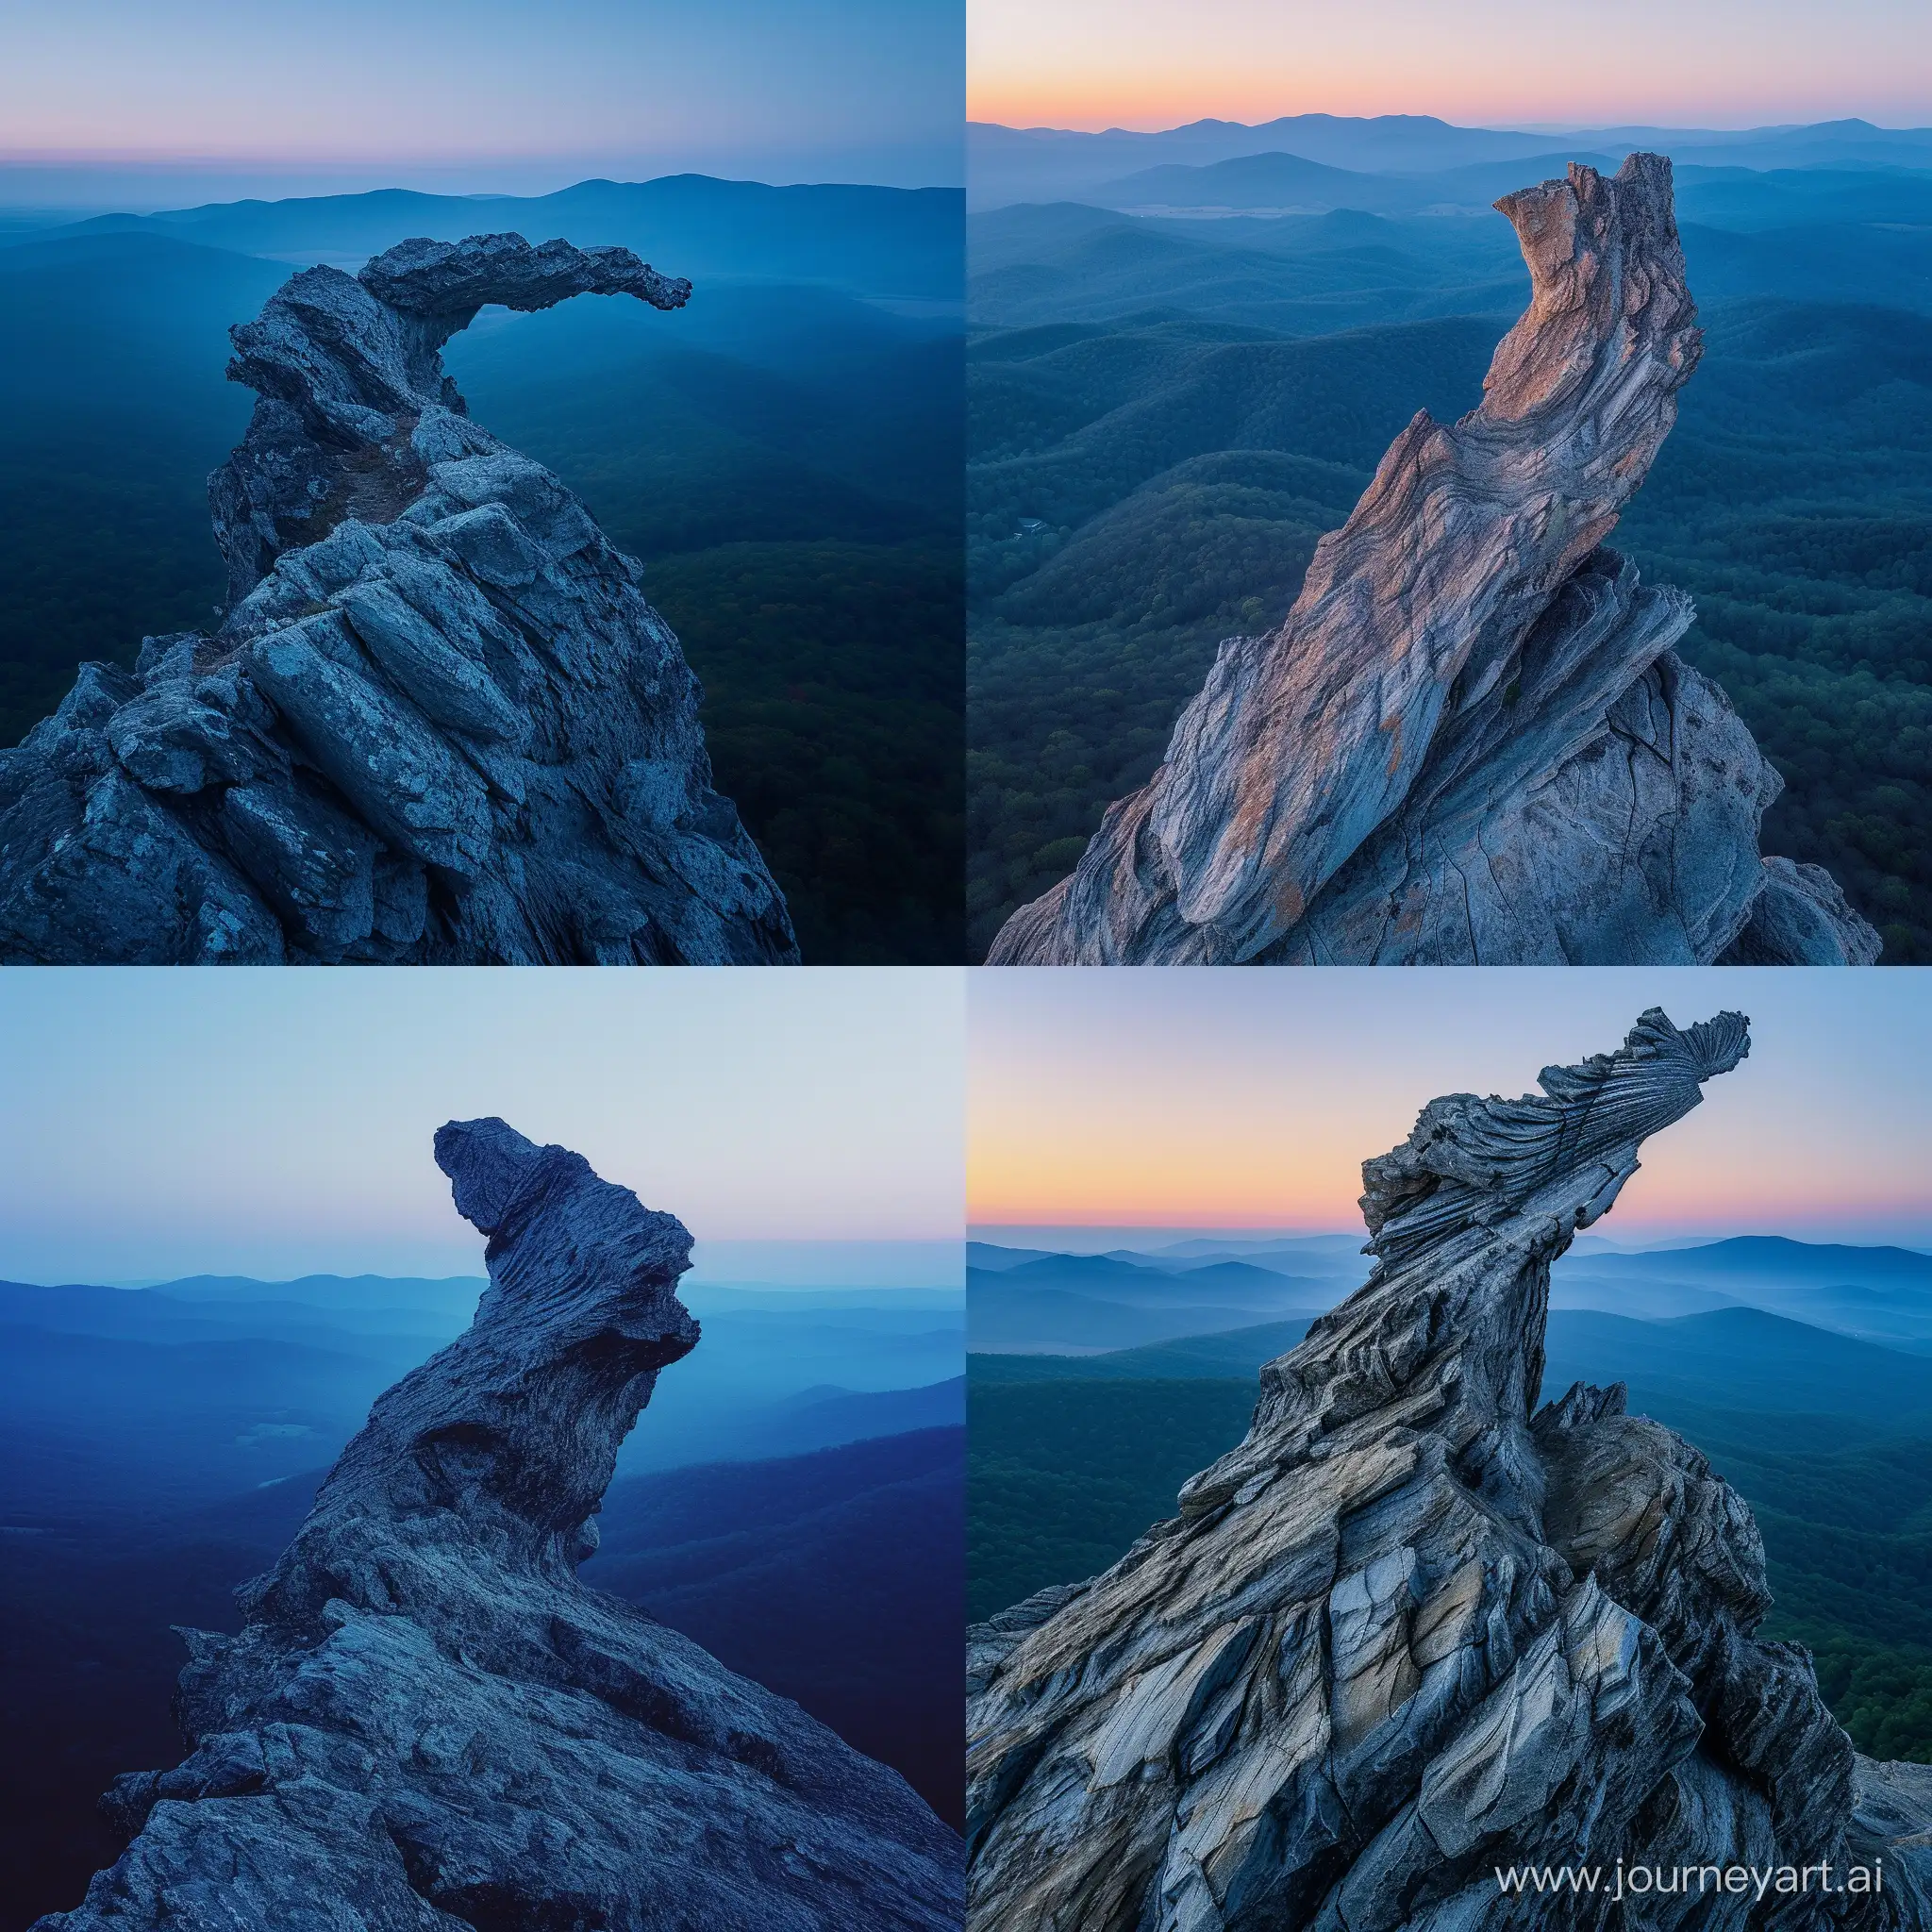 photo of humpback rock outcrop, outcrop is in the shape of a humpback whale breaching, looks extremely similar to a humpback whale, virginia, rolling blue ridge mountains in the background fading into deep blue, drone photography looking at the outcrop, extreme wide shot, early morning, crisp, award winning landscape, sunrise, beautiful, gently lit by the sunrise